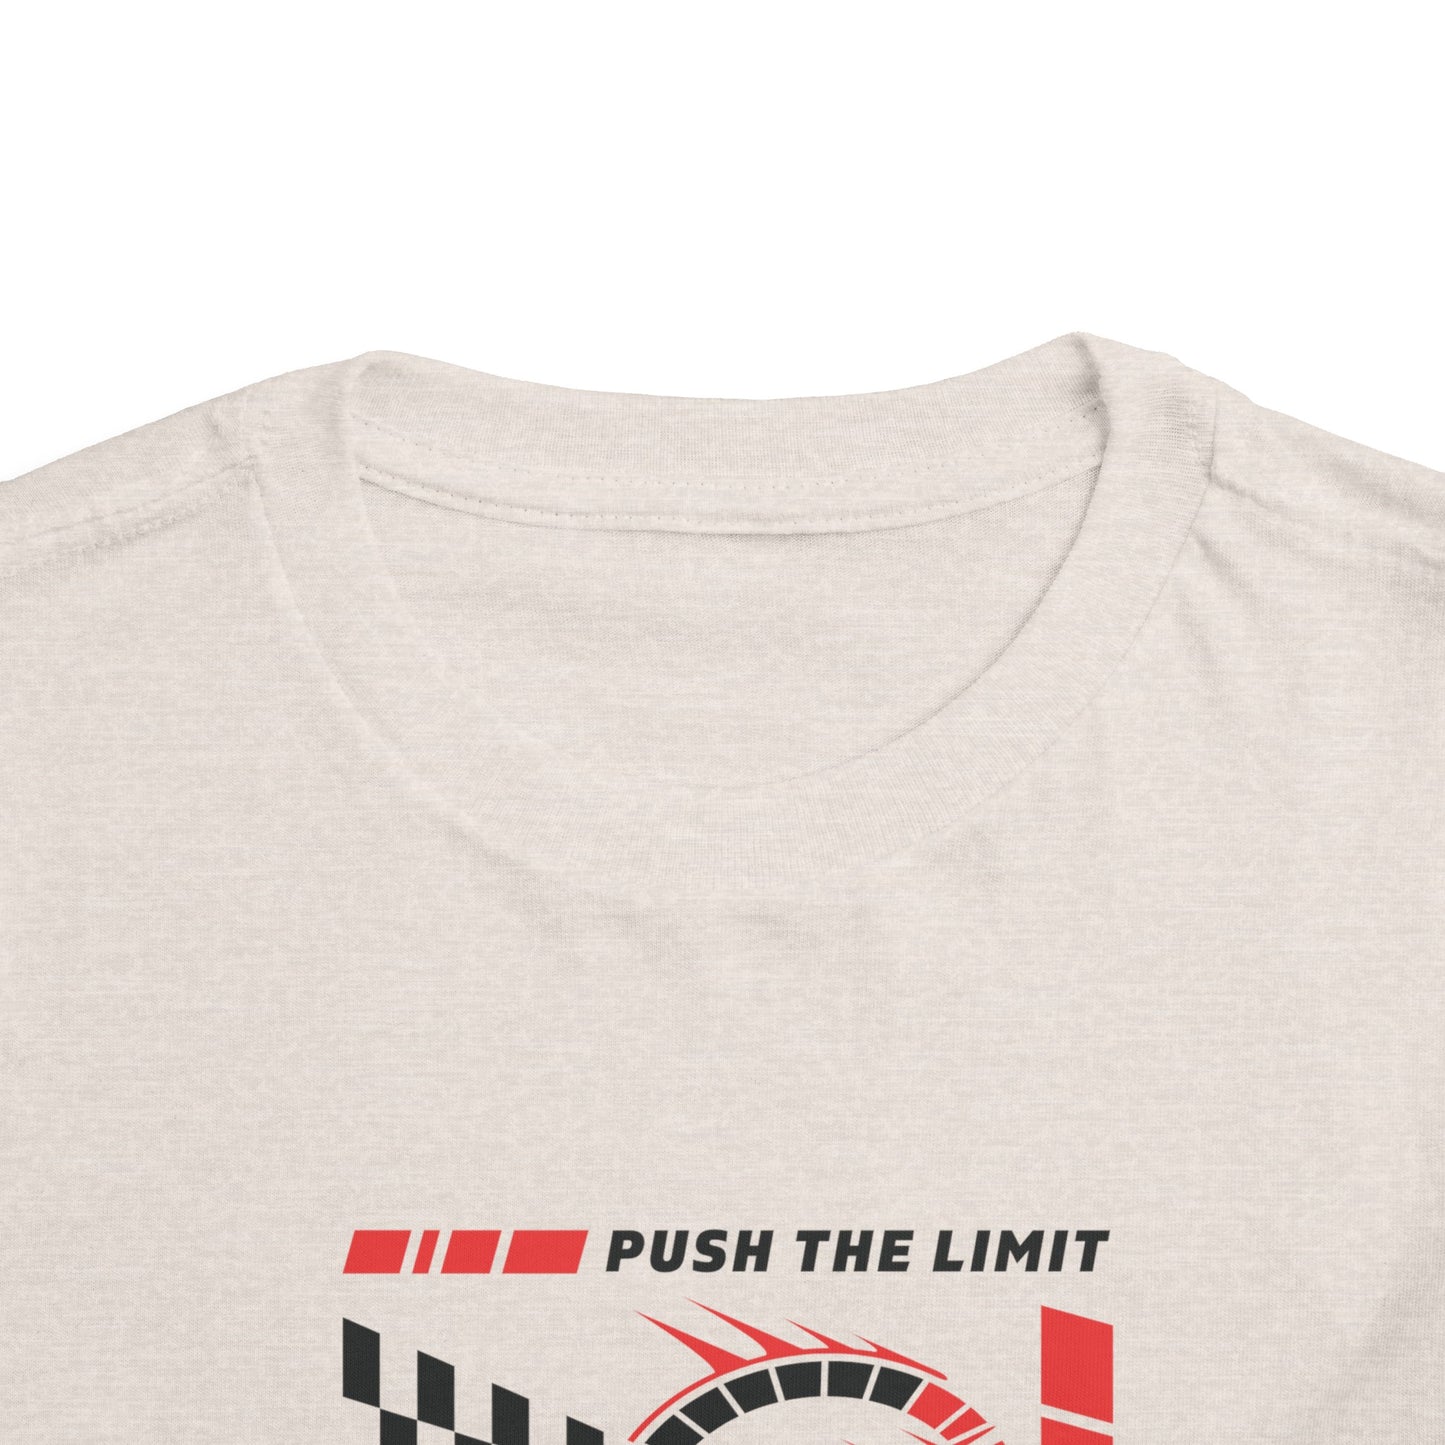 Pushing the limits Toddler Heather Tee - Soft Airlume Cotton, Comfortable & Stylish